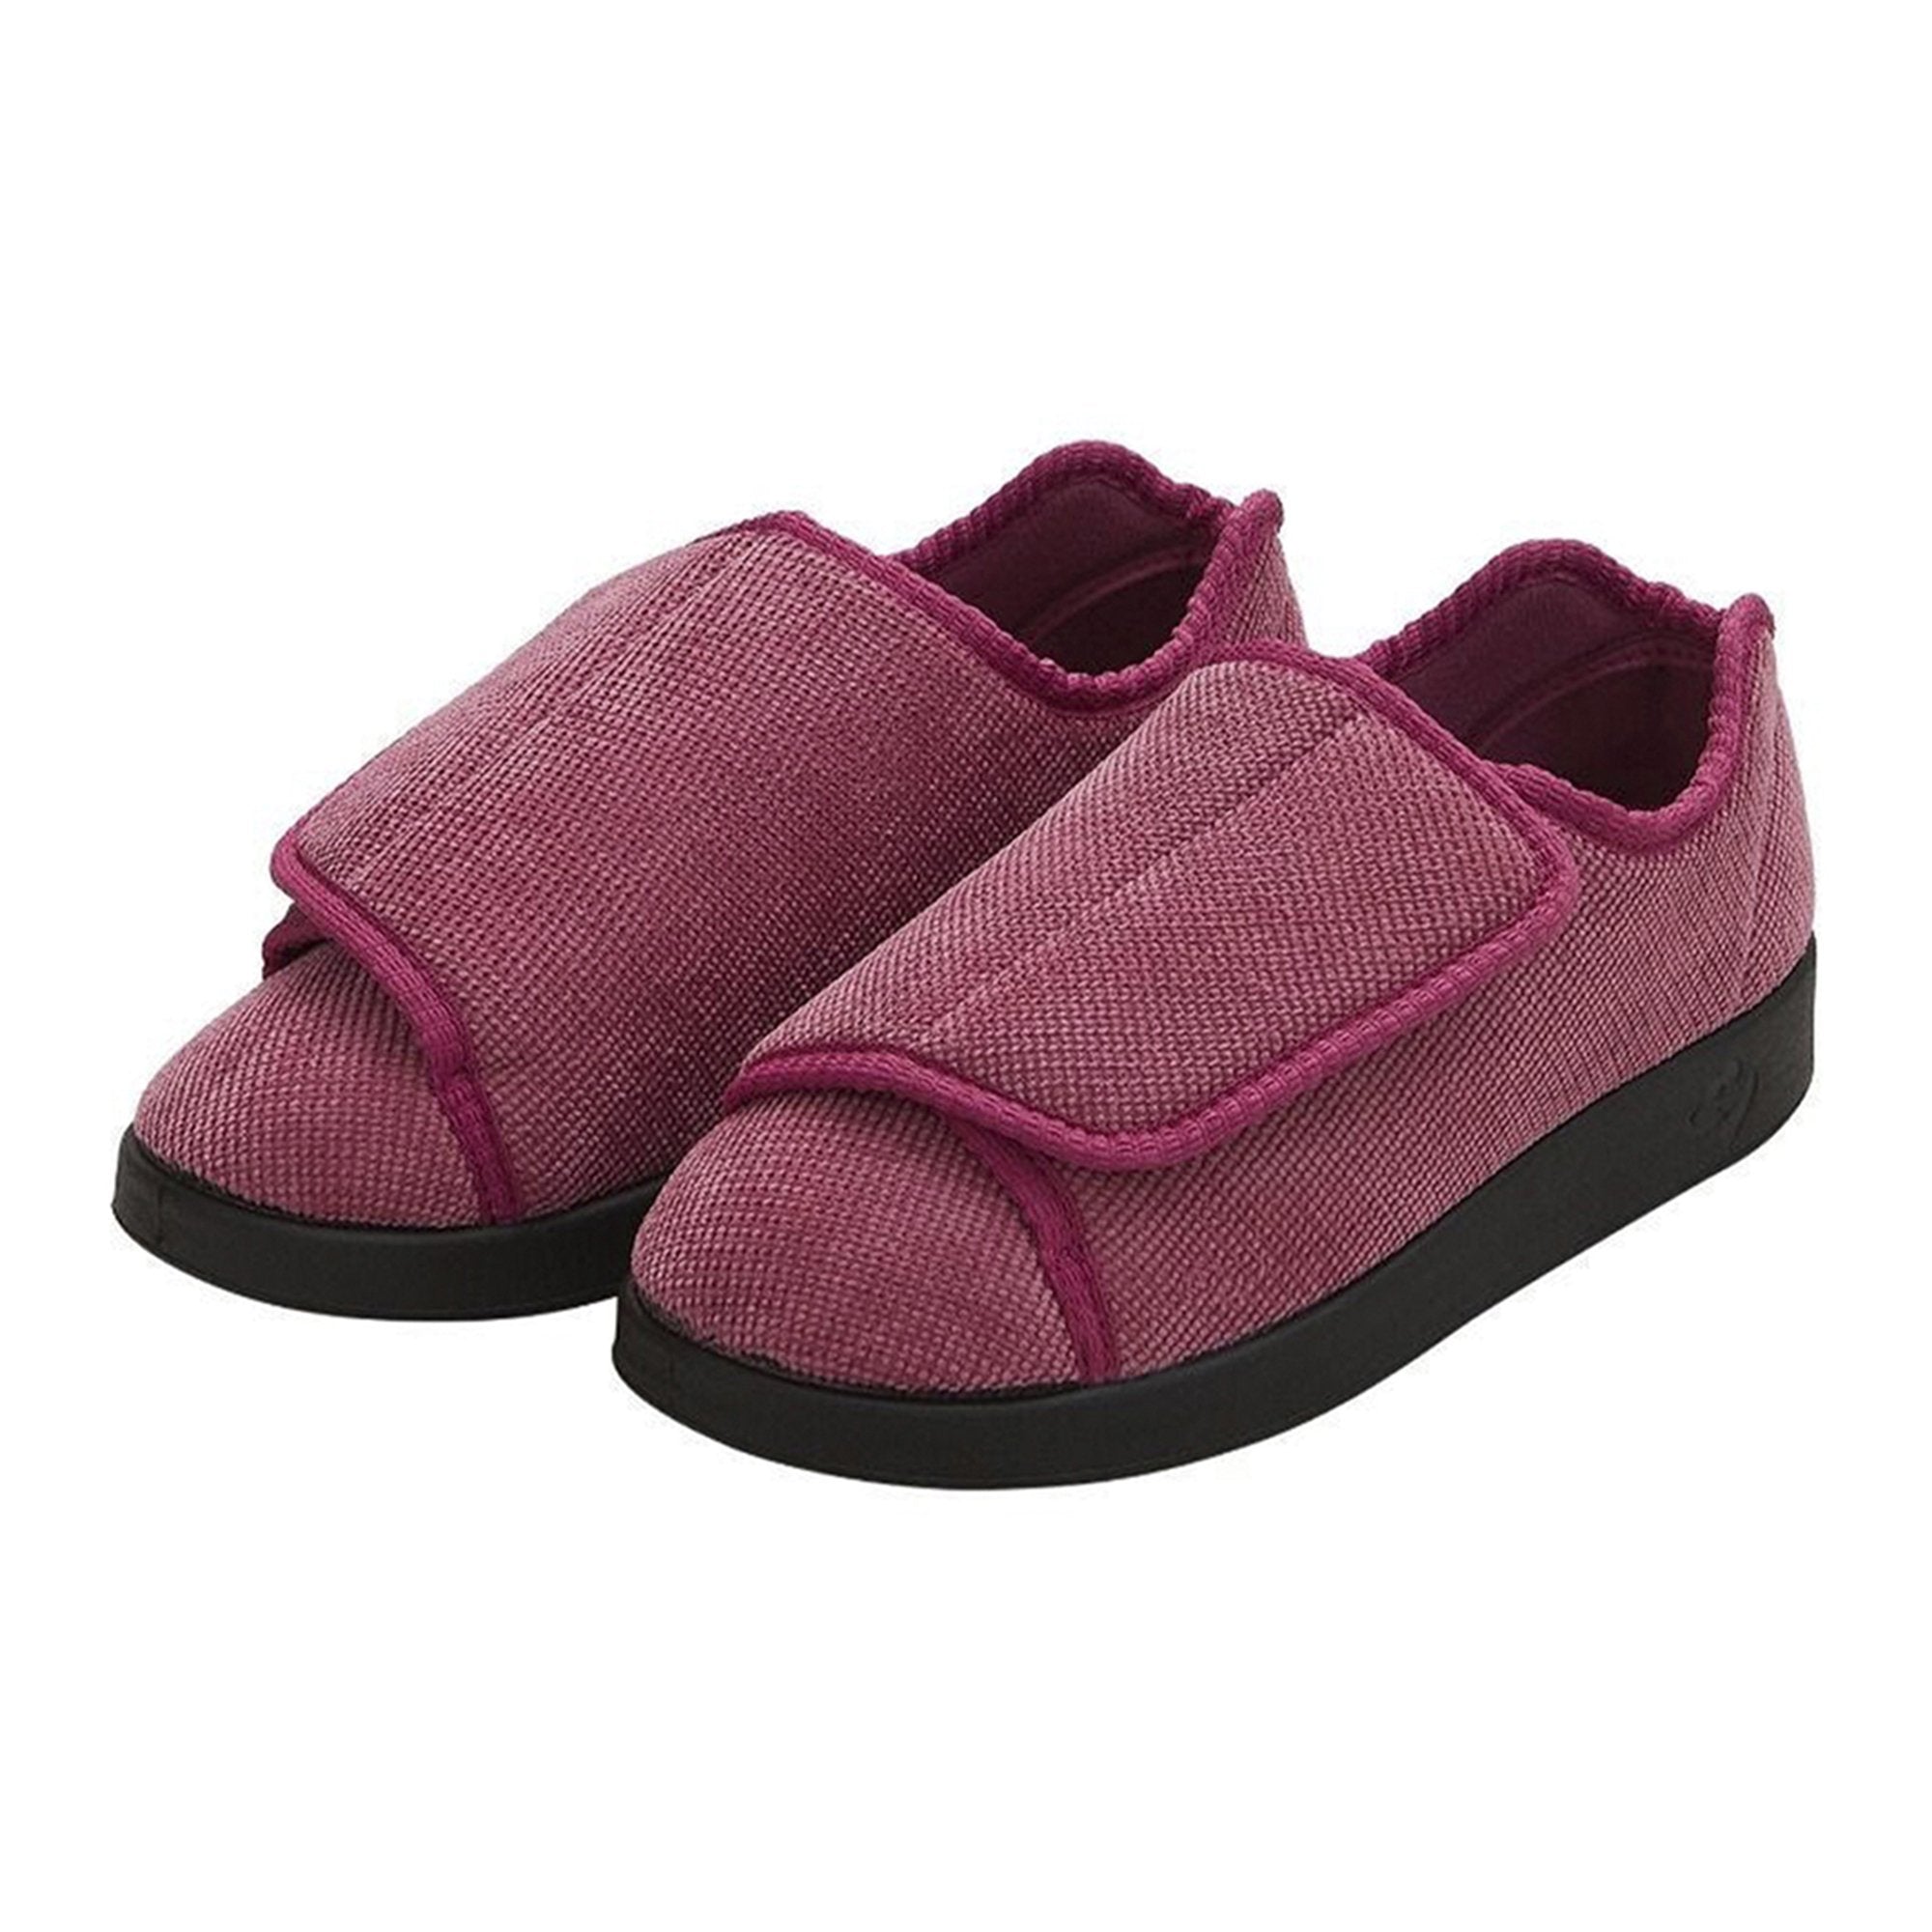 Slippers Silverts® Size 9 / 2X-Wide Dusty Rose Easy Closure